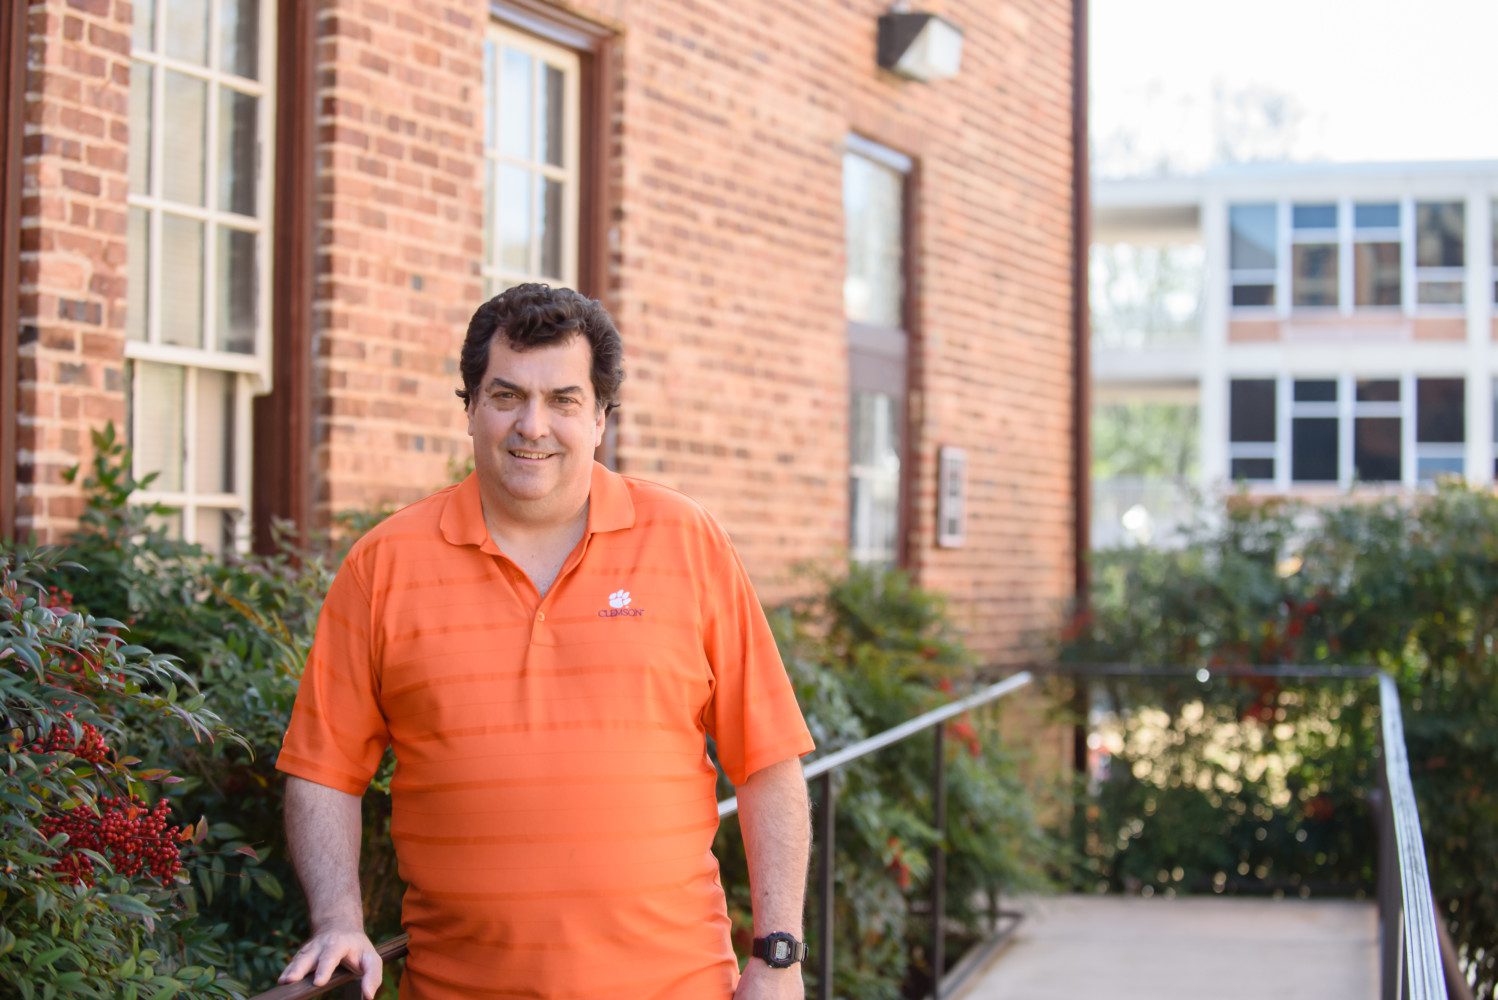 Michael Childress leans against a handrail outside a brick building on Clemson's campus.